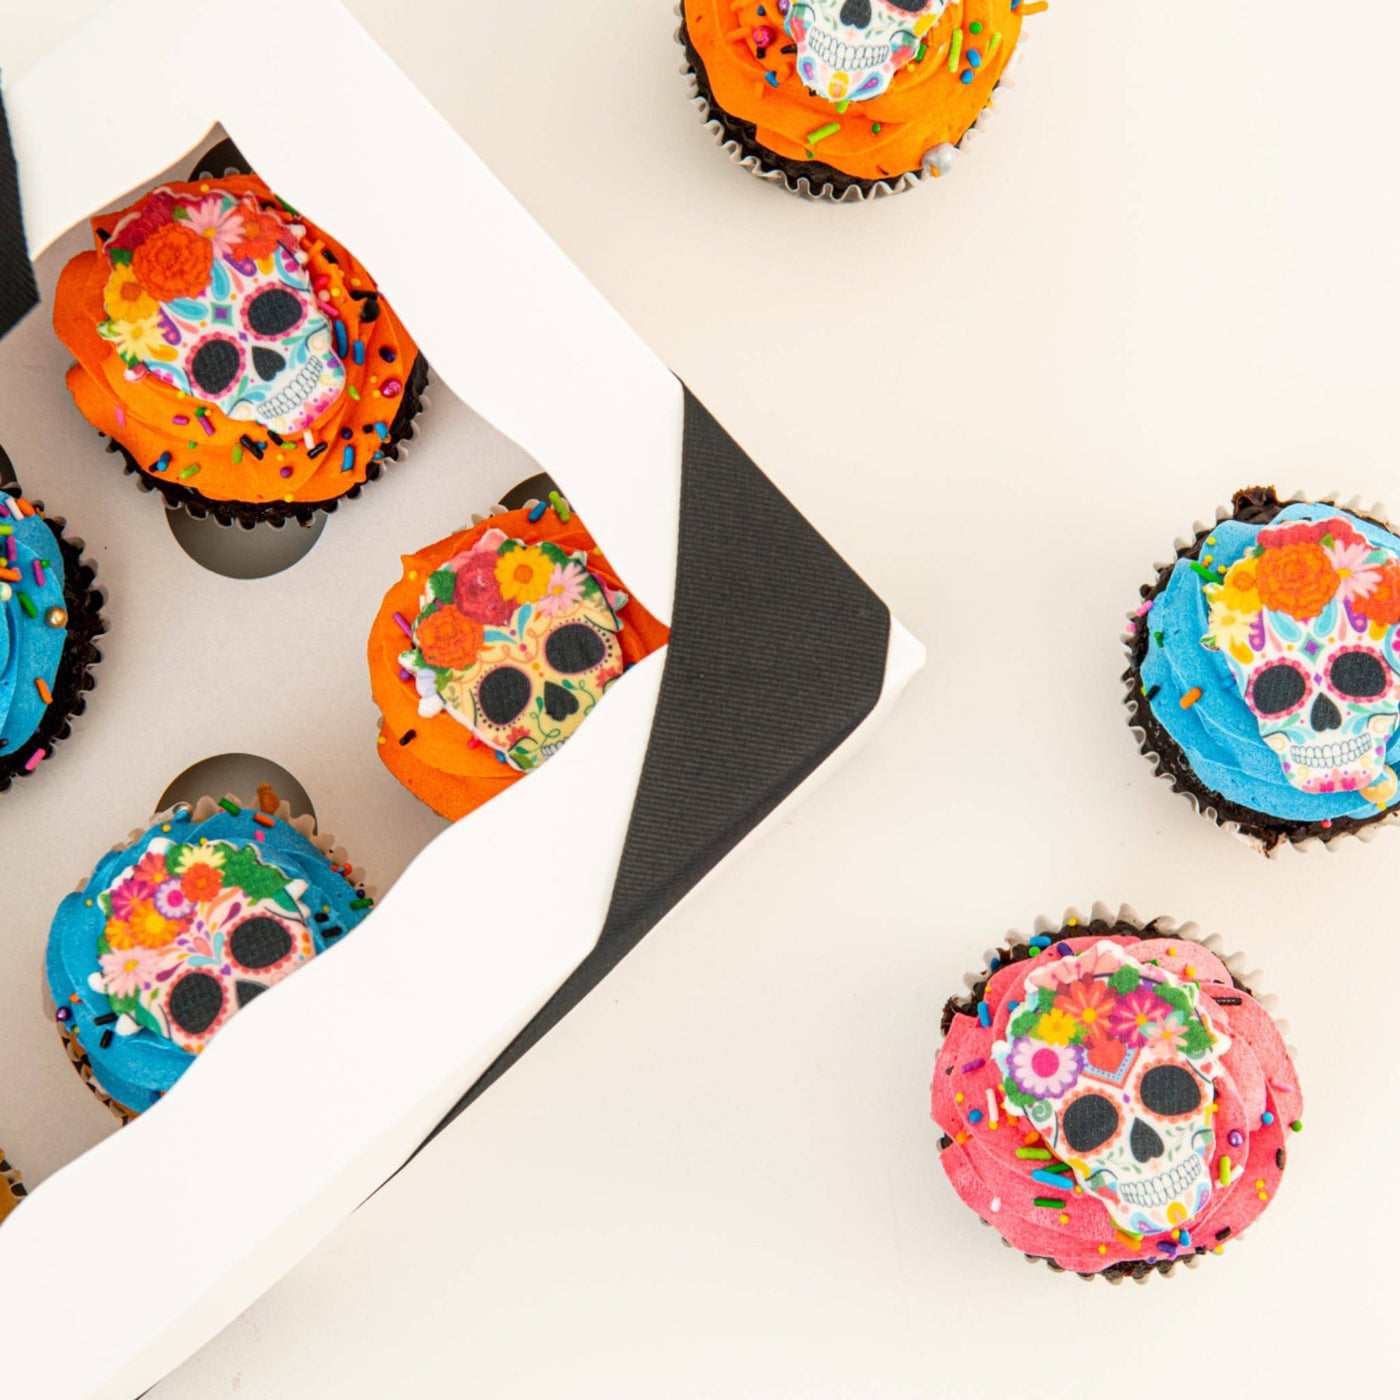 Day of the Dead Skull Cupcakes - Sweet E's Bake Shop